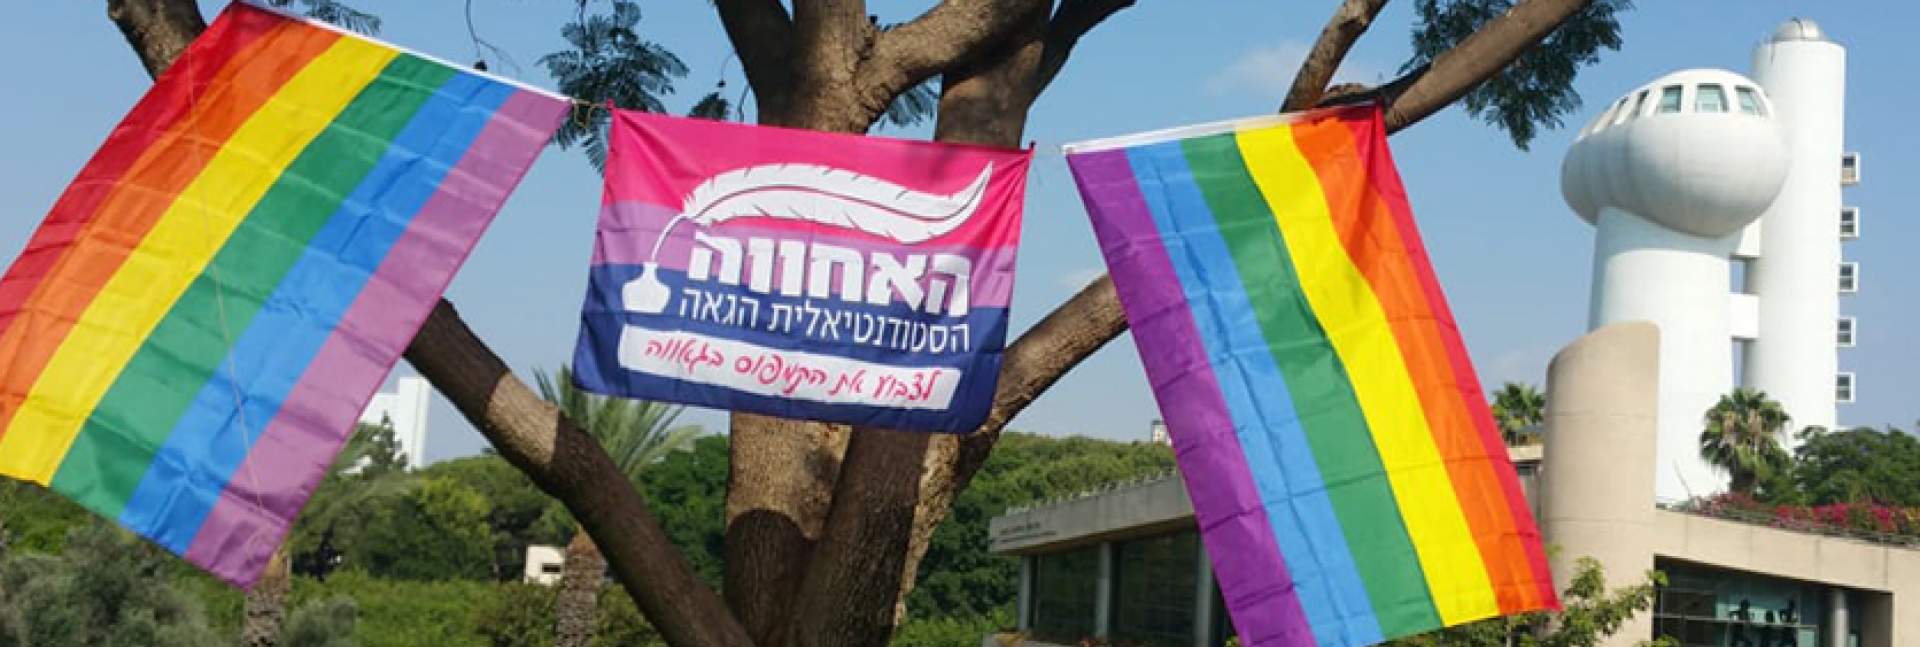 Pride awareness event at the Weizmann Institute of Science; Summer of 2018